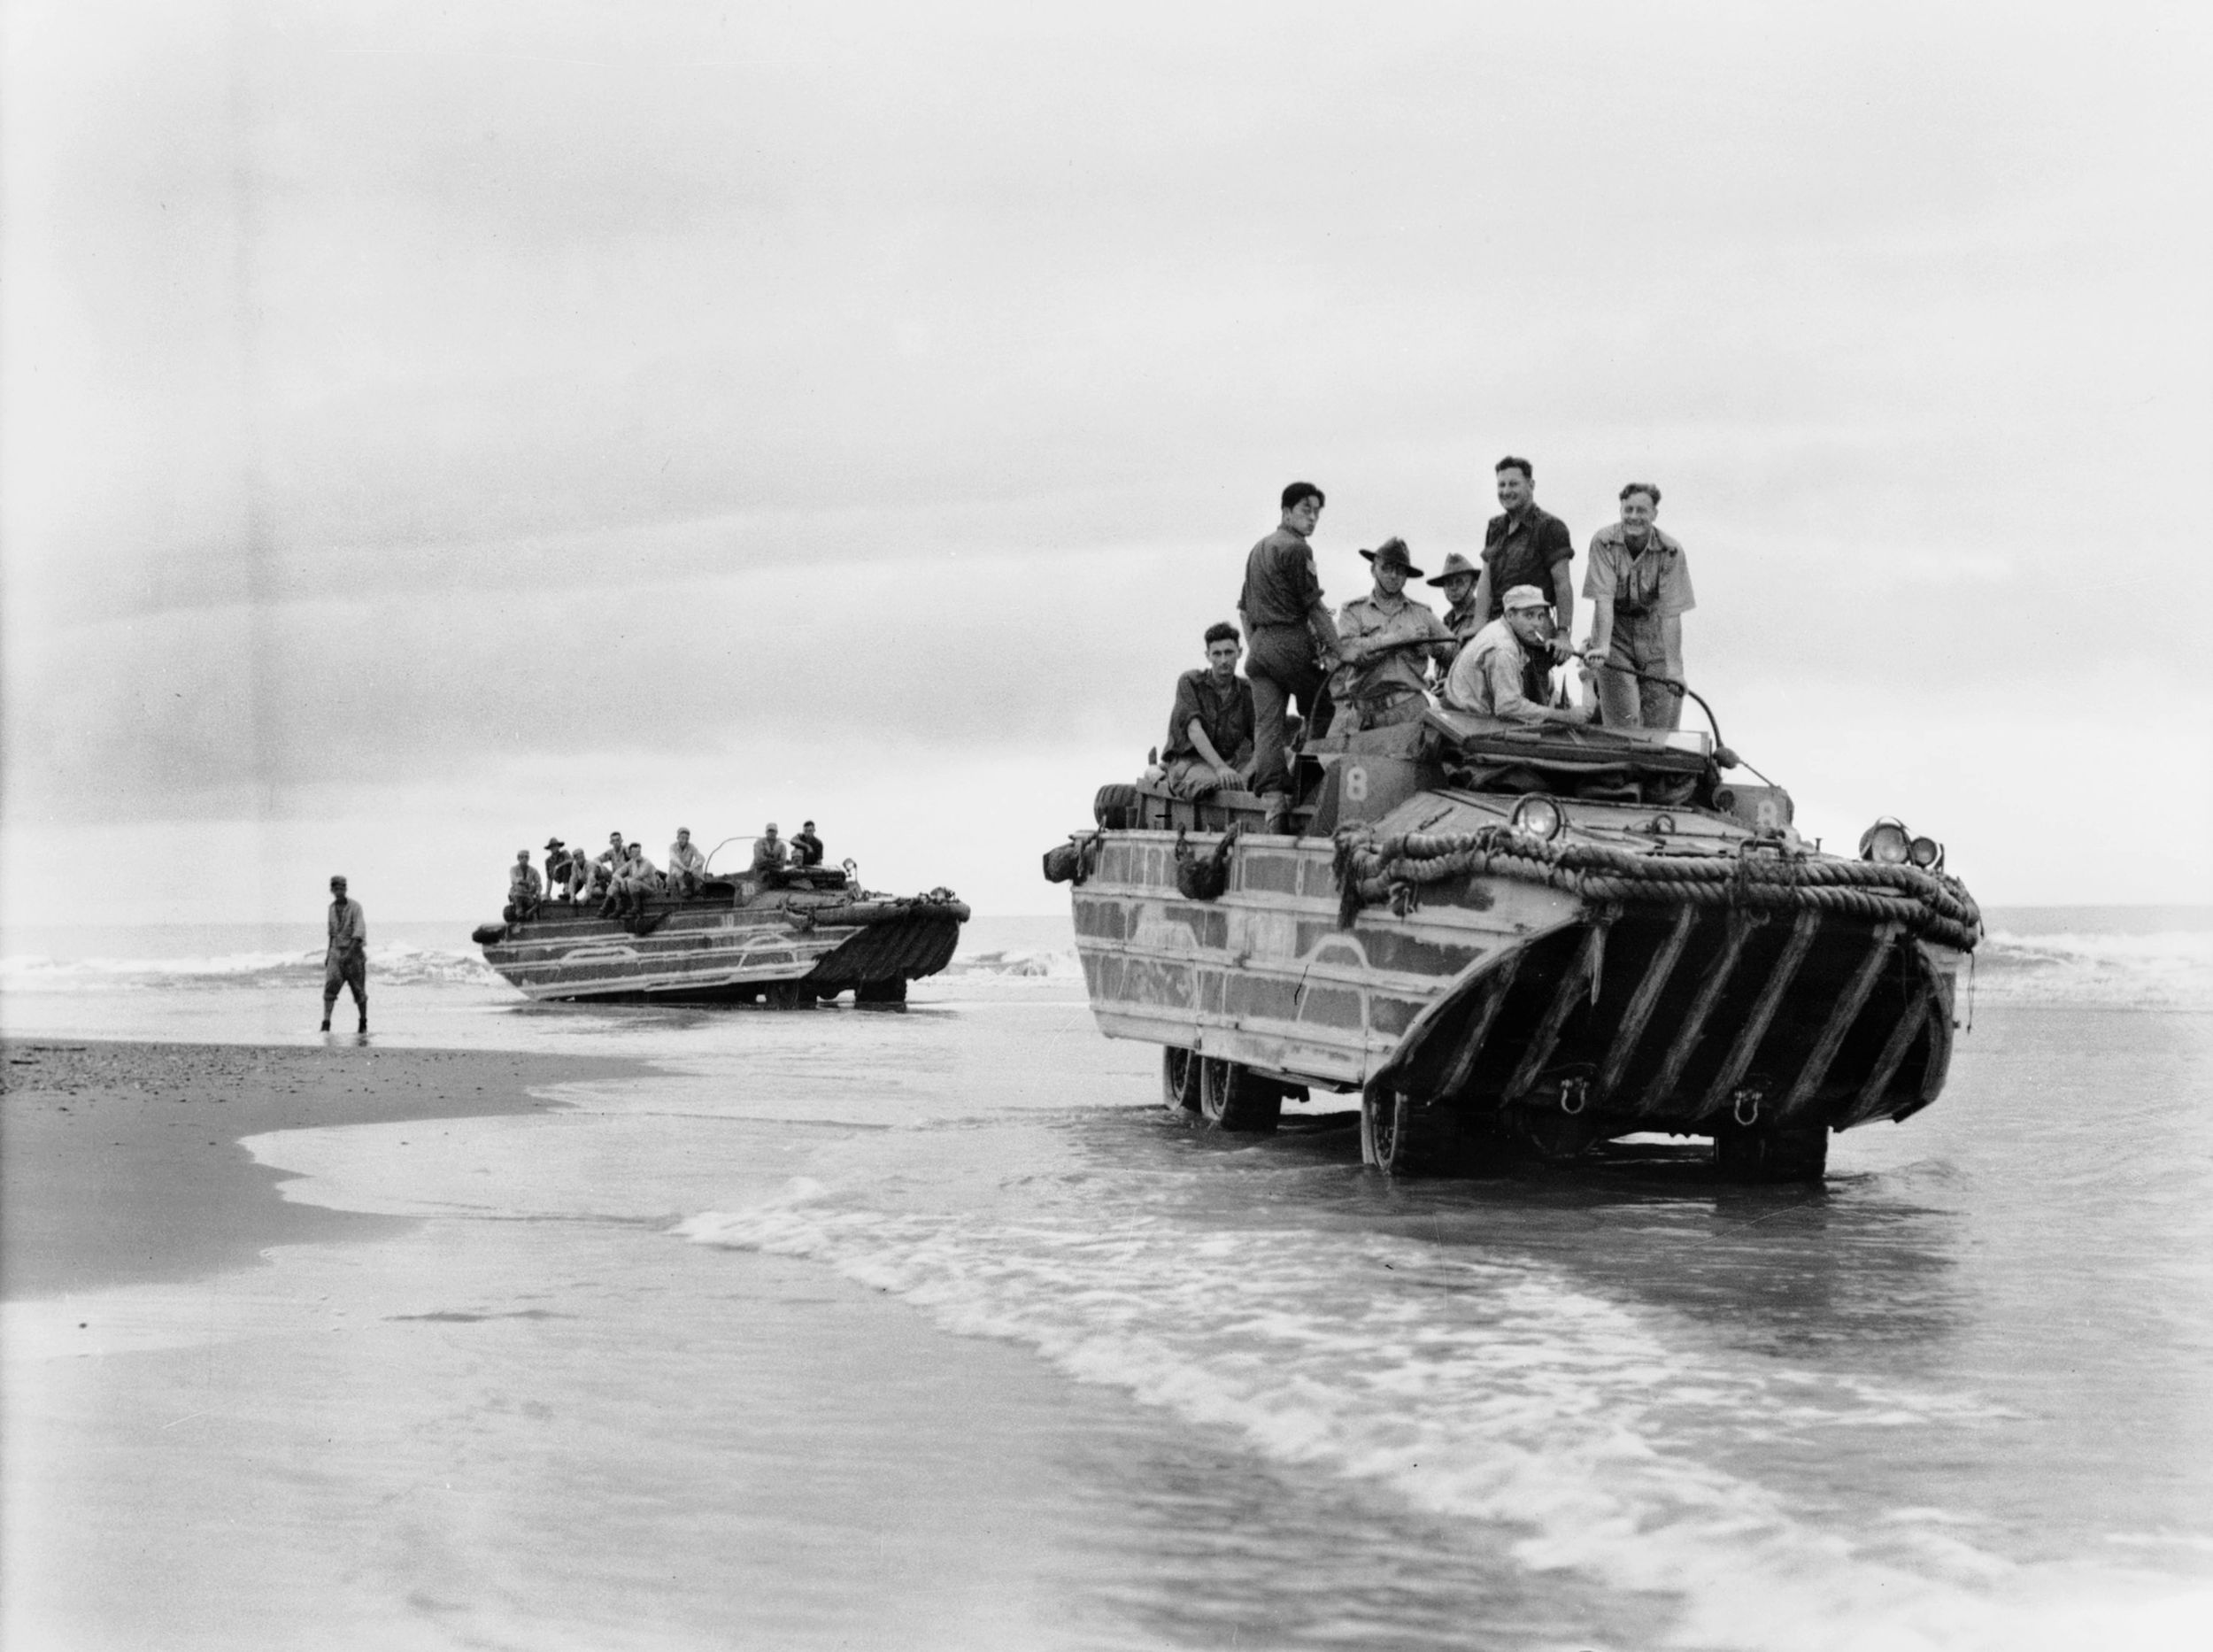 On July 11, 1944, soldiers of 2/10 Commando Squadron are shown hitching rides aboard American-built amphibious DUKW craft as they deploy to Babiang, New Guinea.